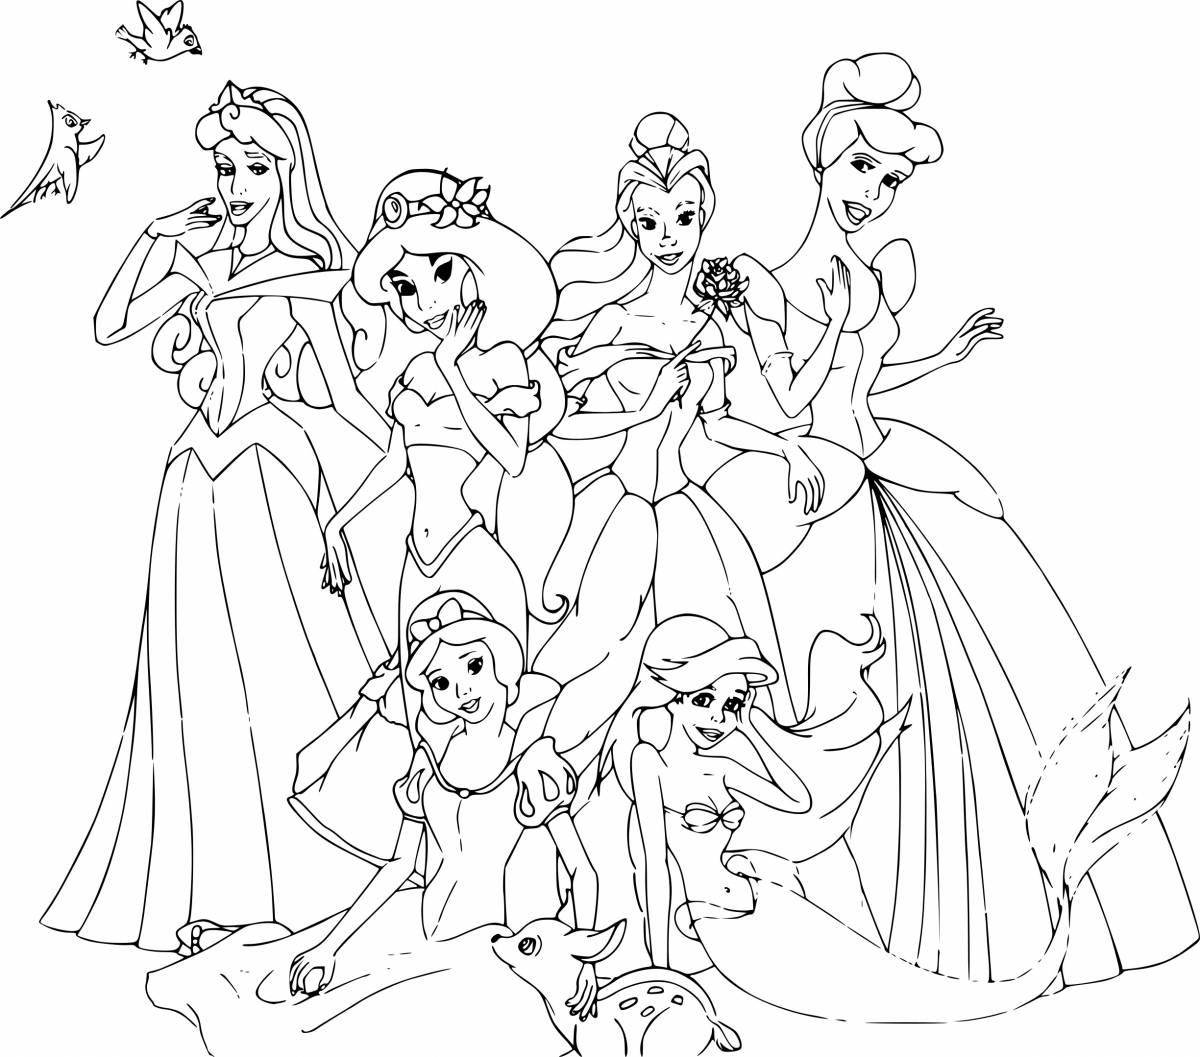 Beautiful coloring book for girls with Disney princesses